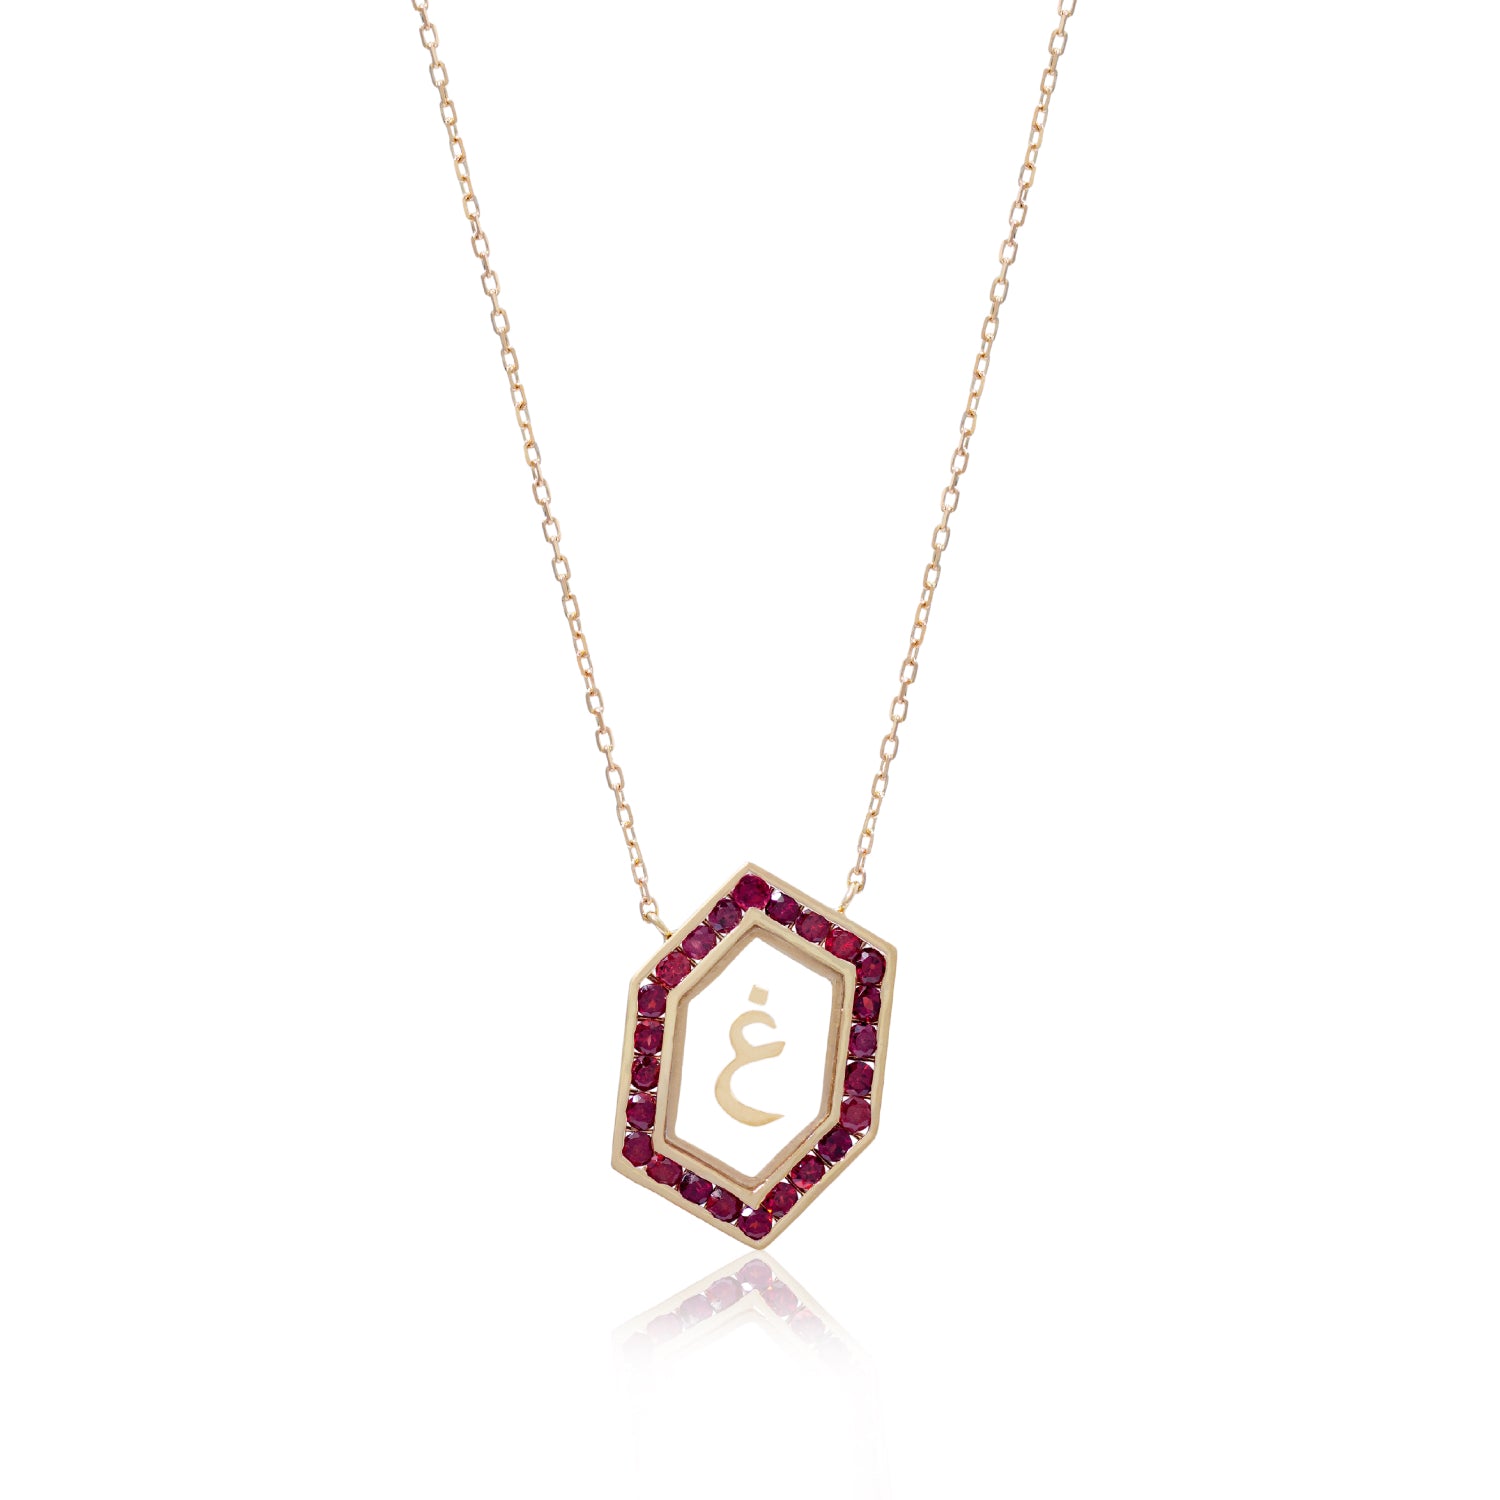 Qamoos 1.0 Letter غ Ruby Necklace in Yellow Gold